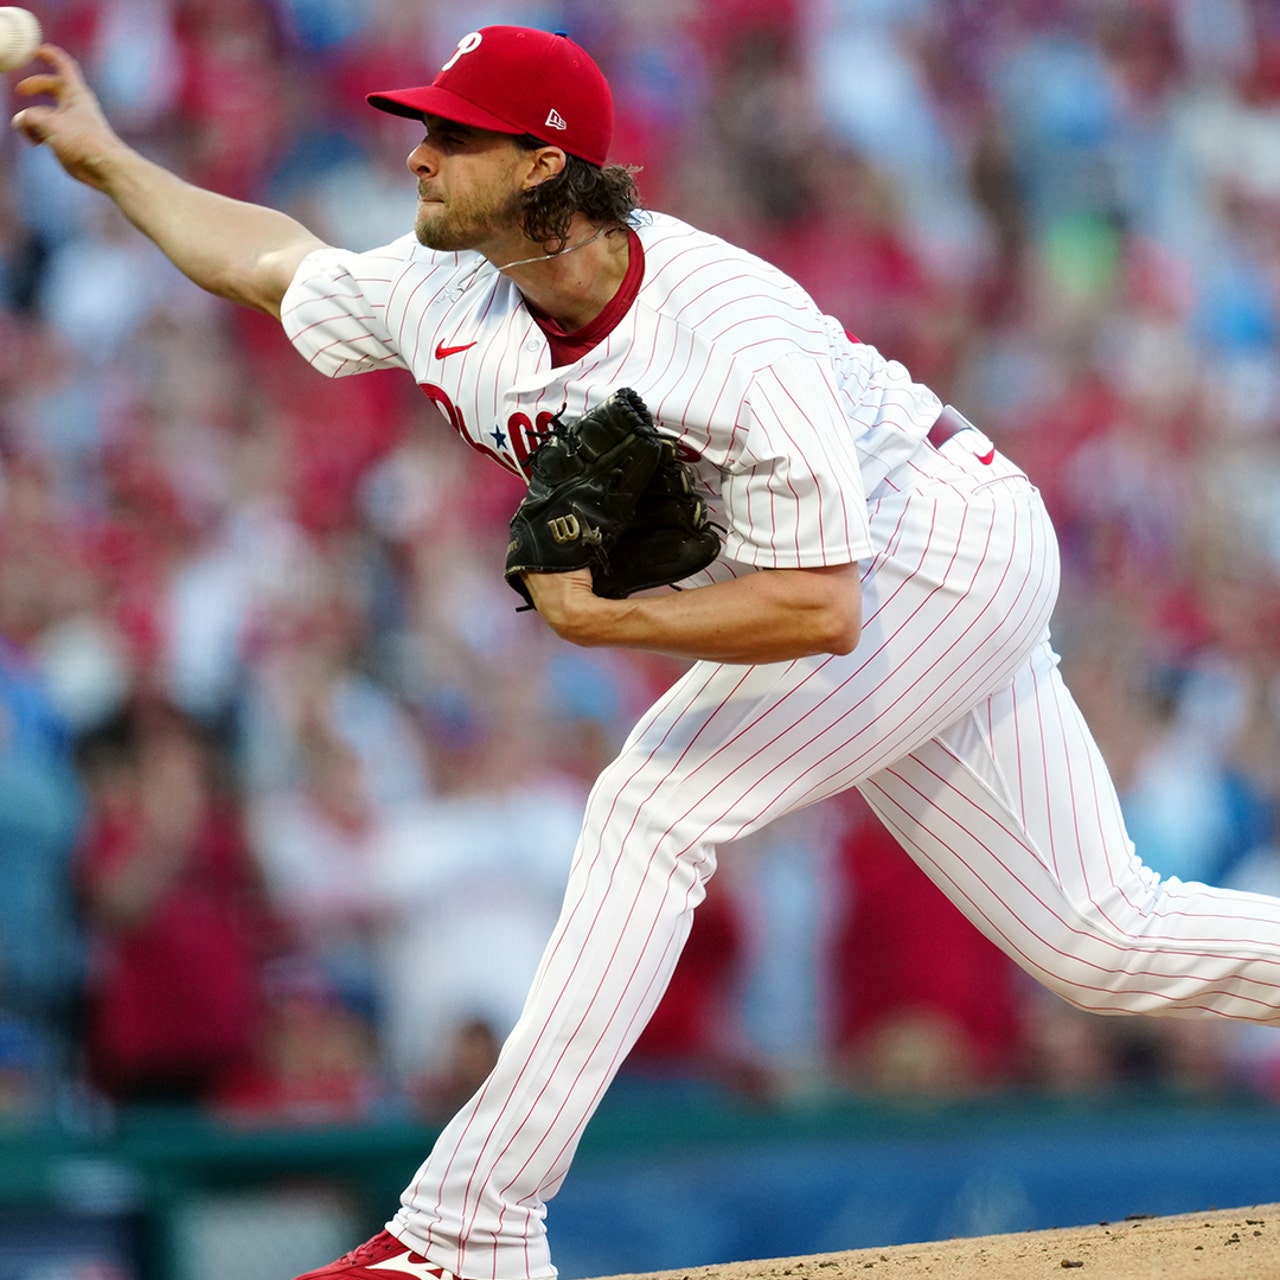 Phillies' pitcher takes over MLB wins lead in victory against